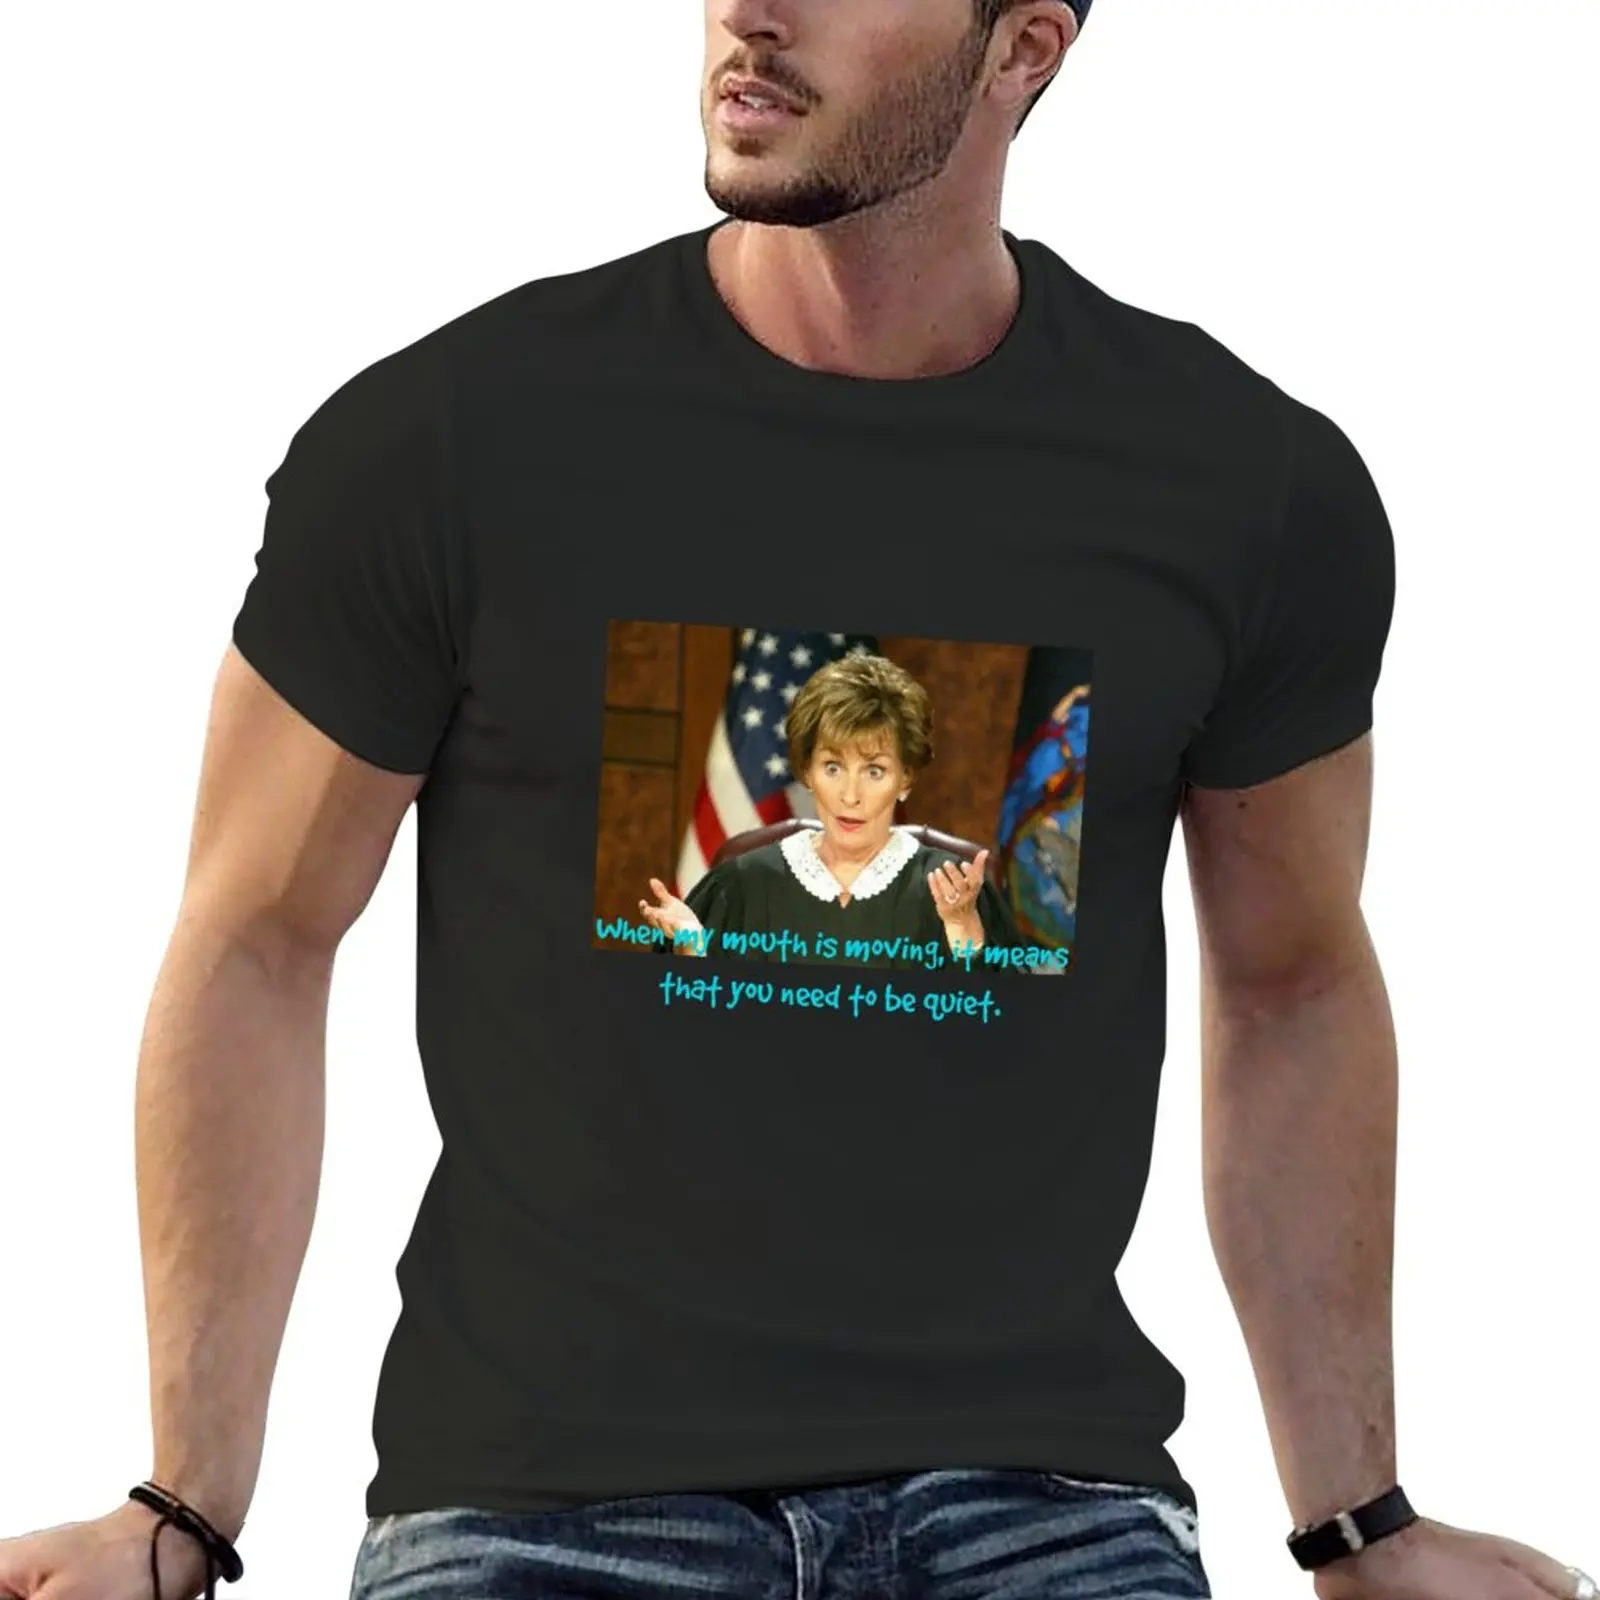 

judge judy - when my mouth is moving T-Shirt aesthetic clothes summer clothes mens graphic t-shirts funny